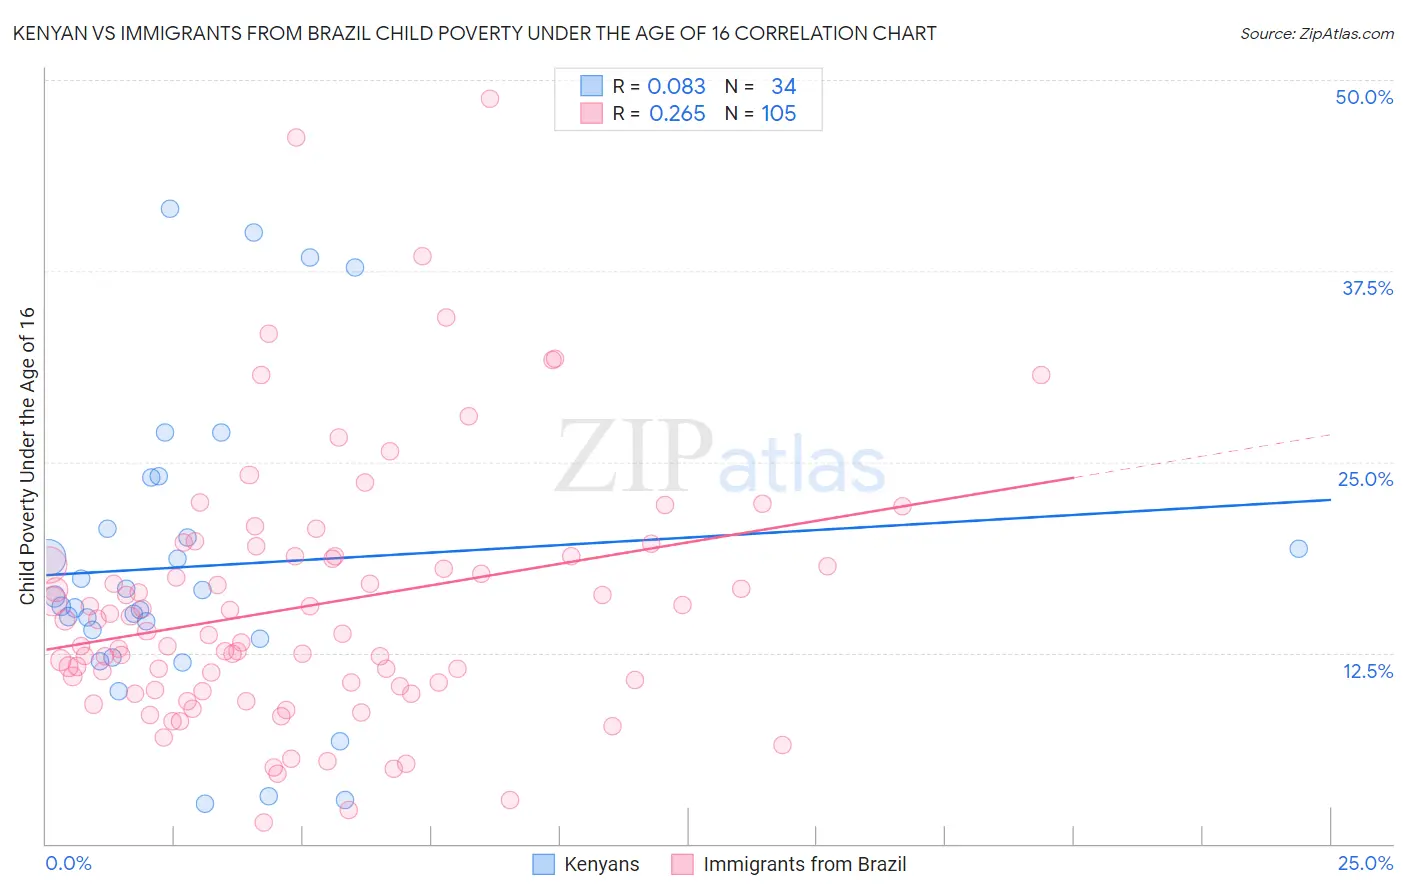 Kenyan vs Immigrants from Brazil Child Poverty Under the Age of 16